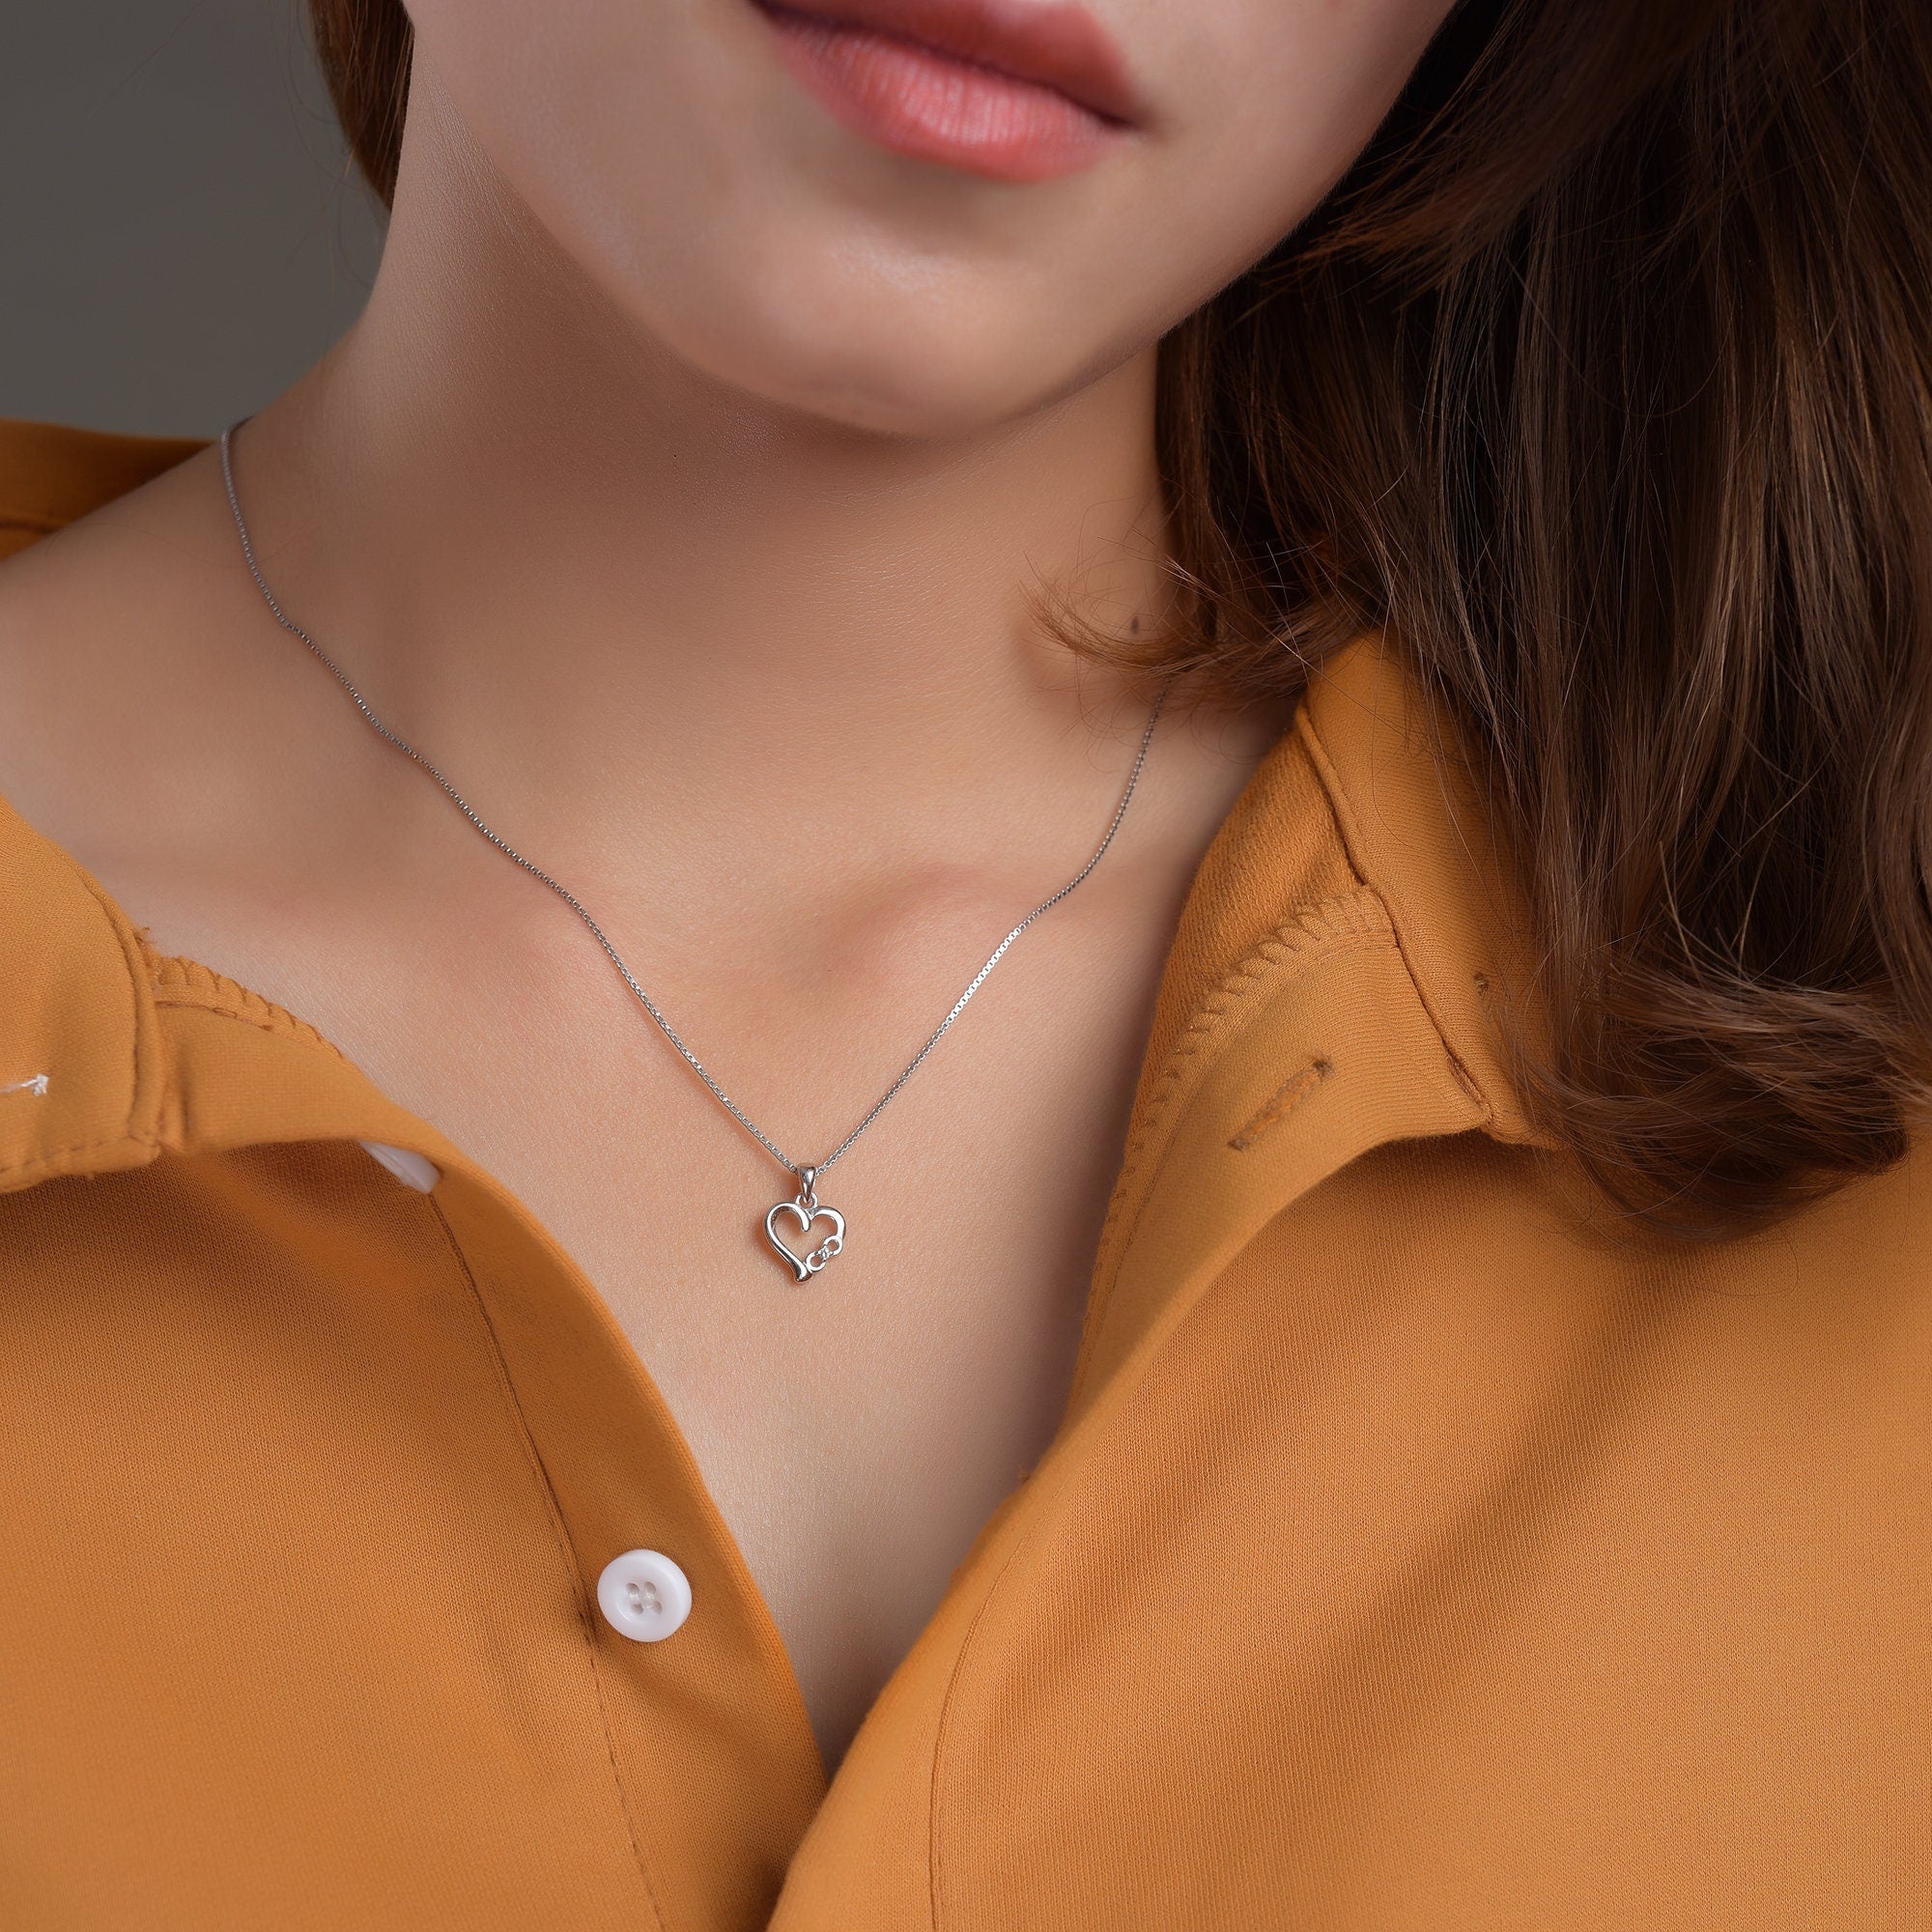 Sterling Silver pendant necklace • Dainty Chain Necklace • Simple Everyday Necklace• Layering Chains• Delicate Necklace